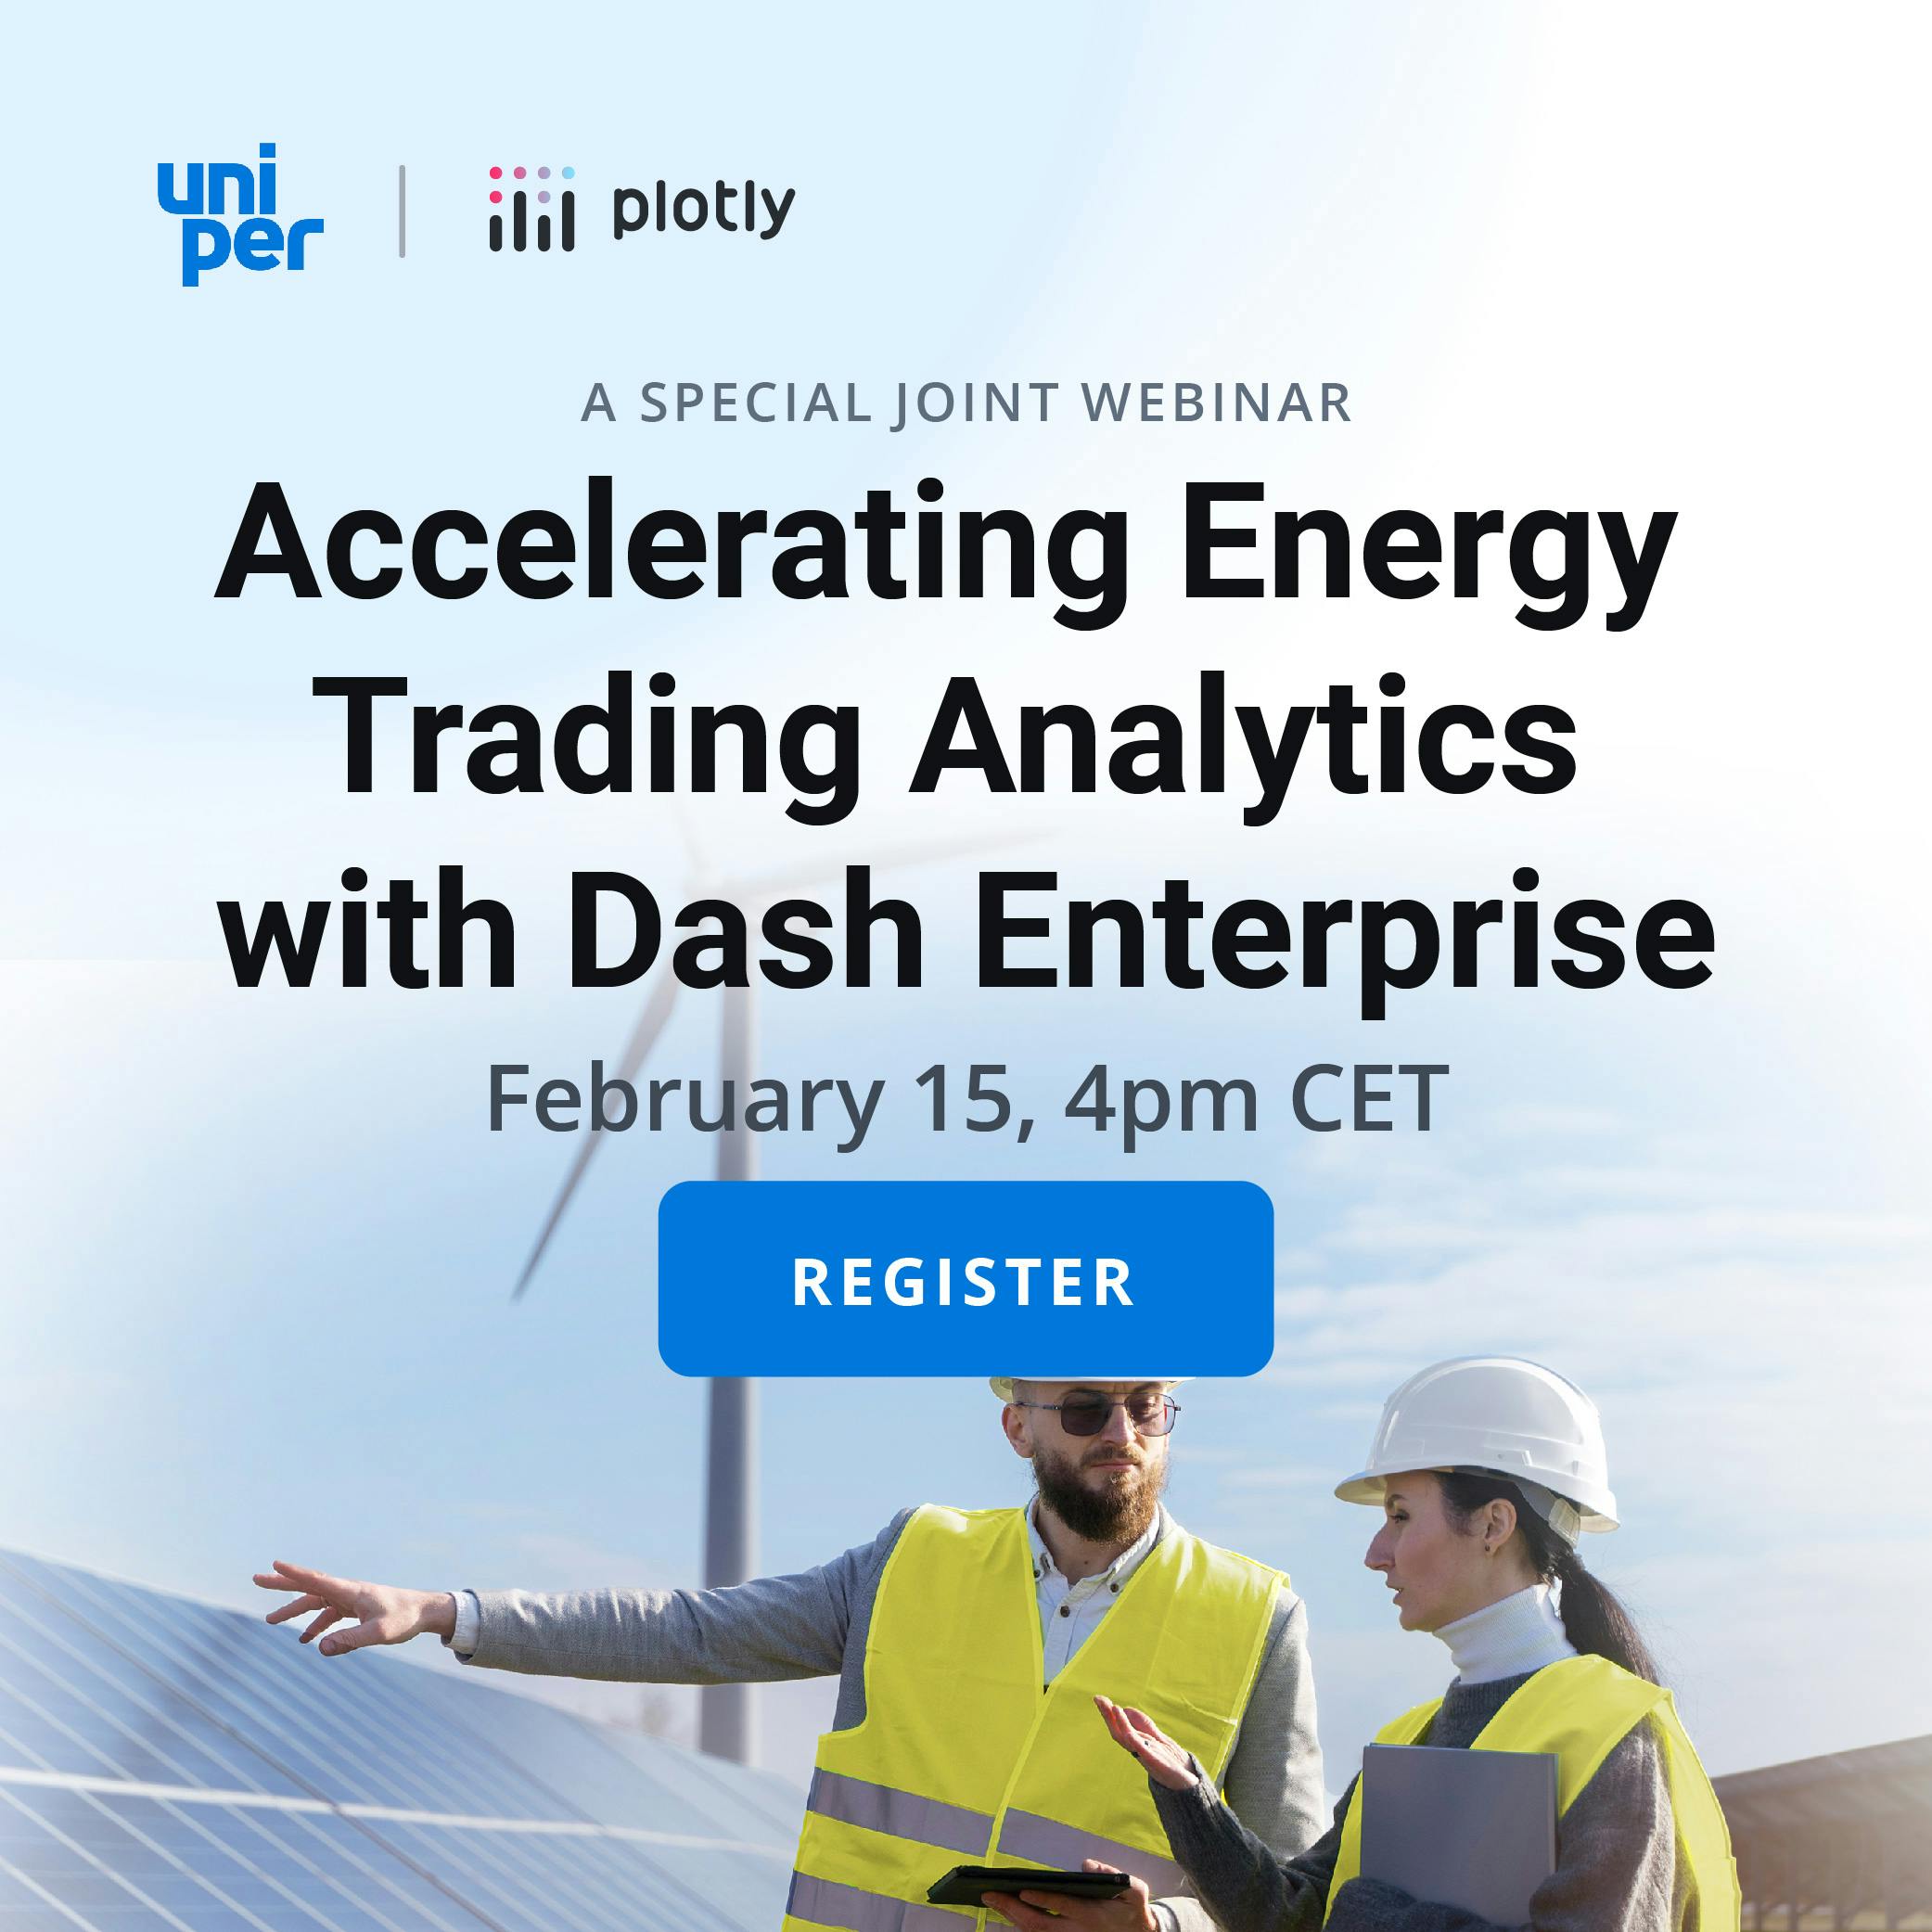 Register for the upcoming webinar: Accelerating Energy Trading Analytics with Dash Enterprise.